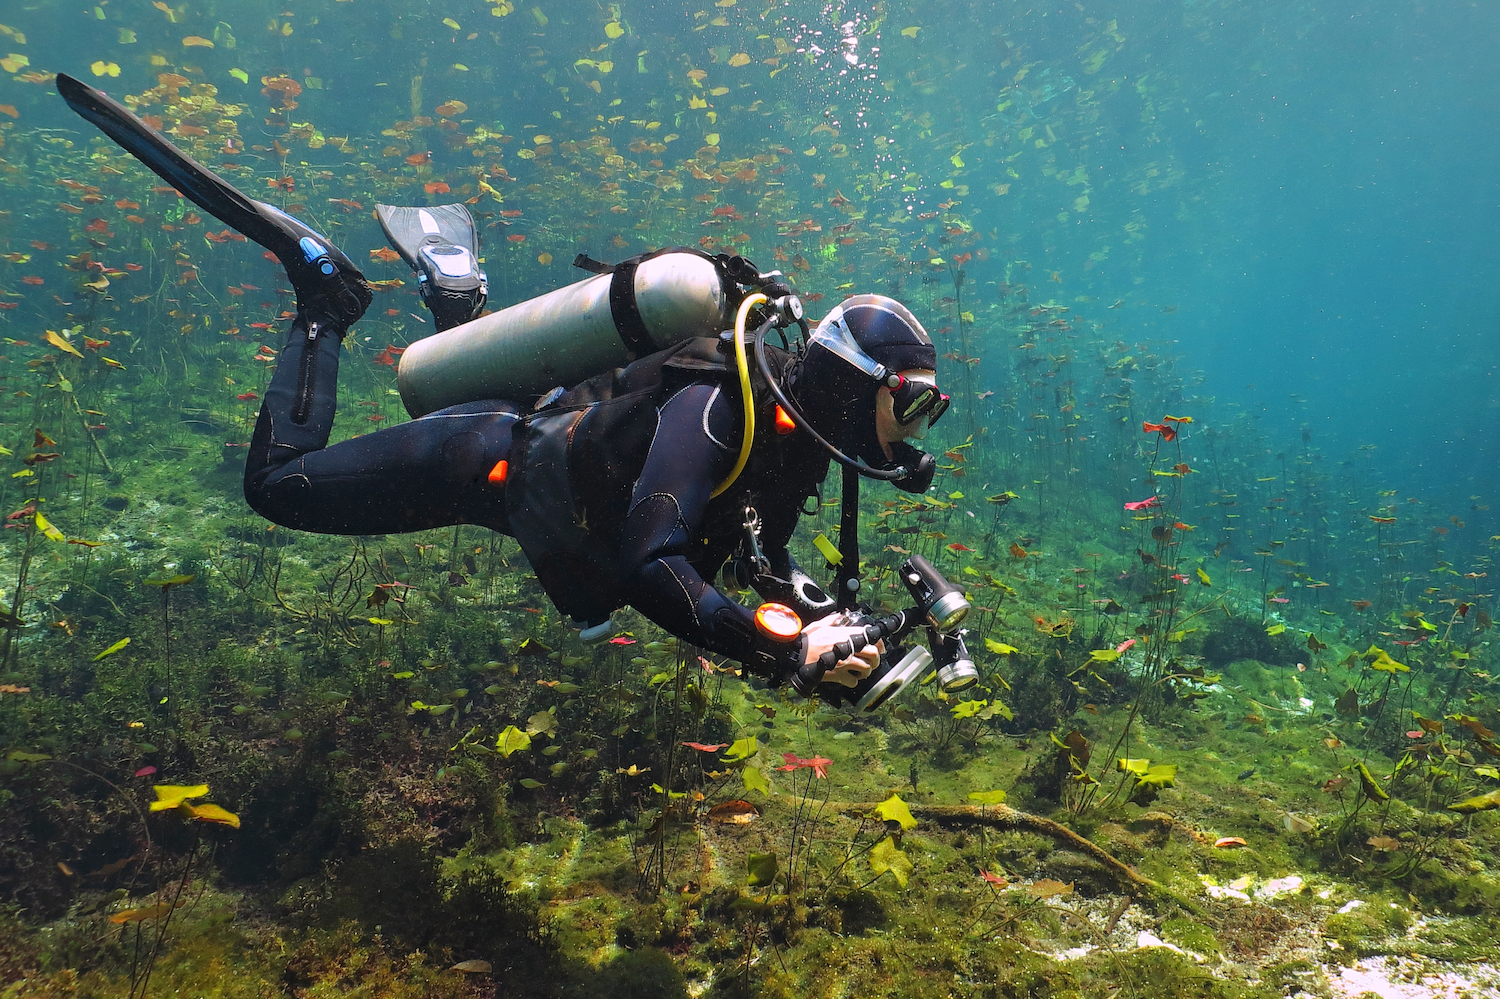 A diver holding an underwater camera hovers over the bottom